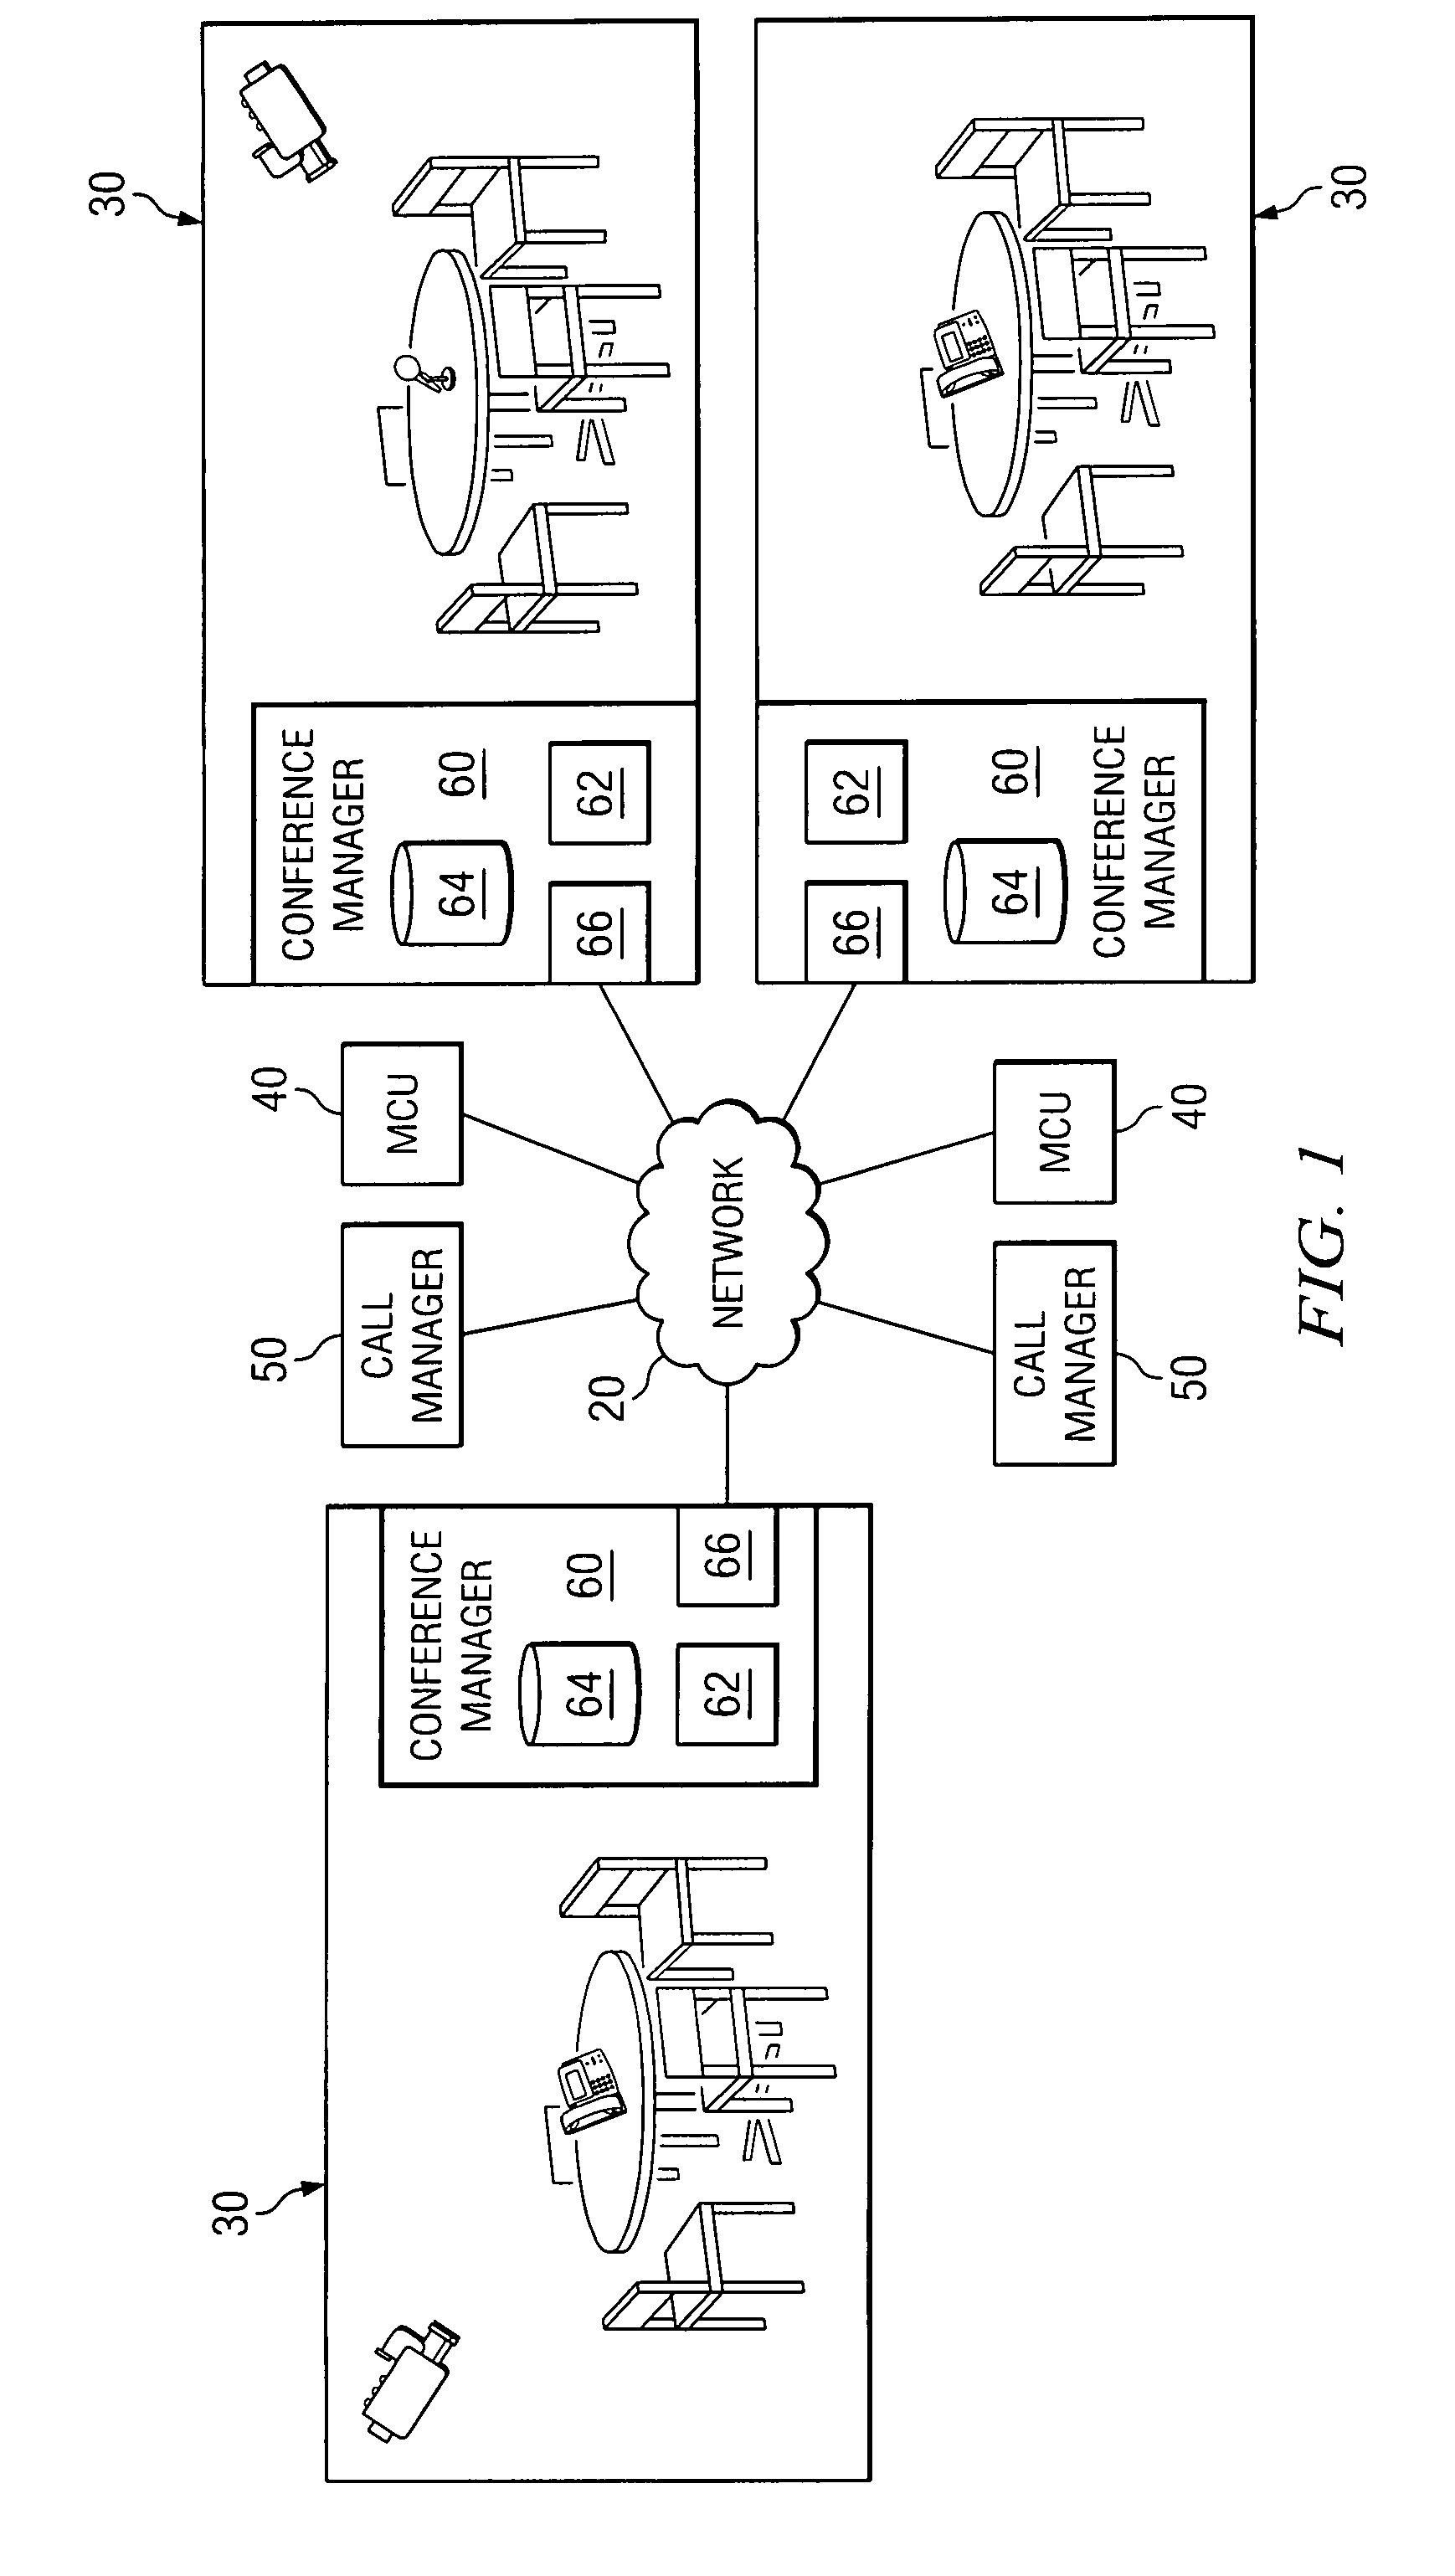 Method and system for identifying a multipoint control unit for hosting a conference